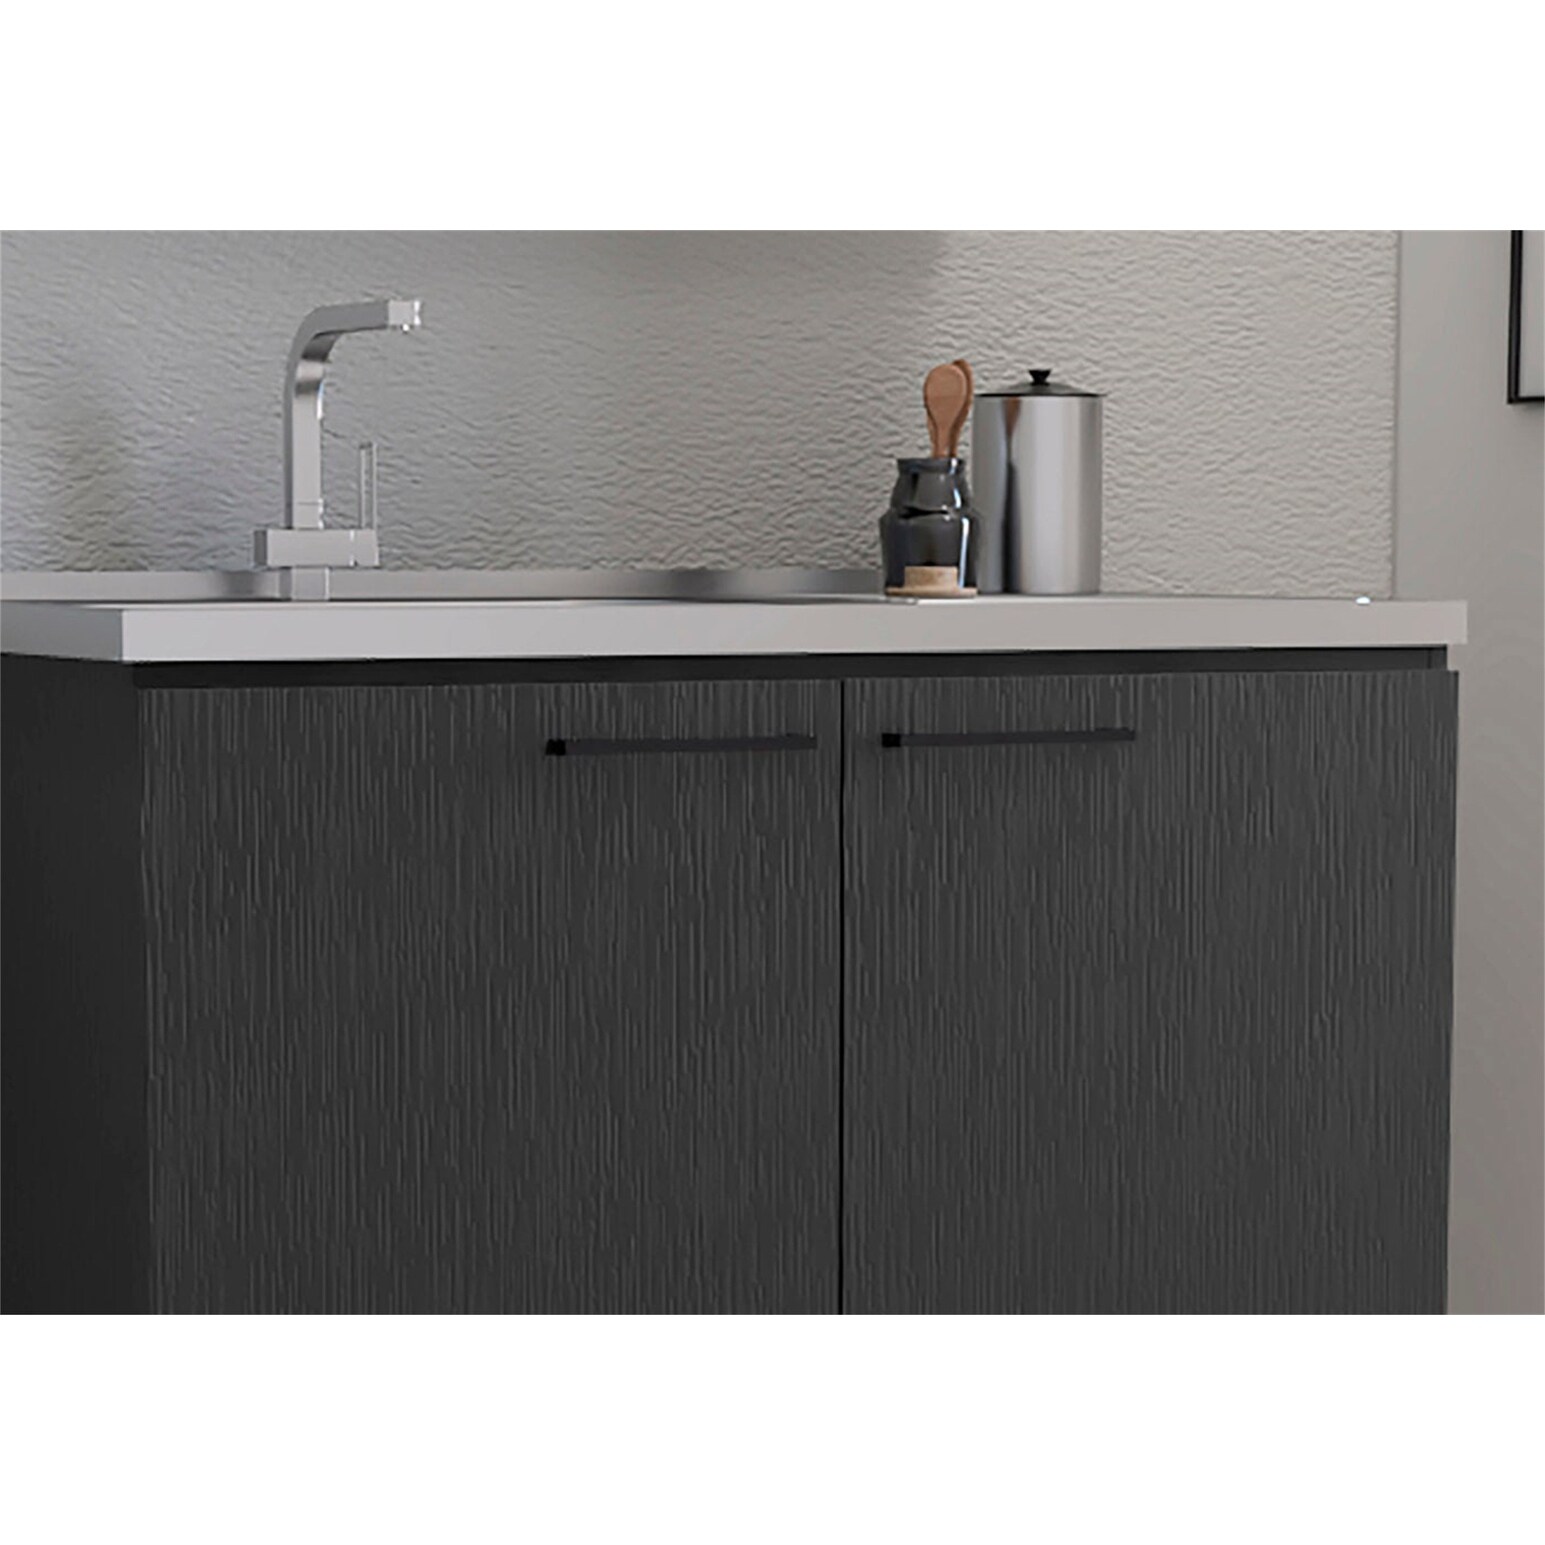 https://ak1.ostkcdn.com/images/products/is/images/direct/b5b1ab947b7b94b1d82c3a51feccace85733ac0b/Utility-Sink-with-Cabinet-Stainless-Steel-Countertop.jpg